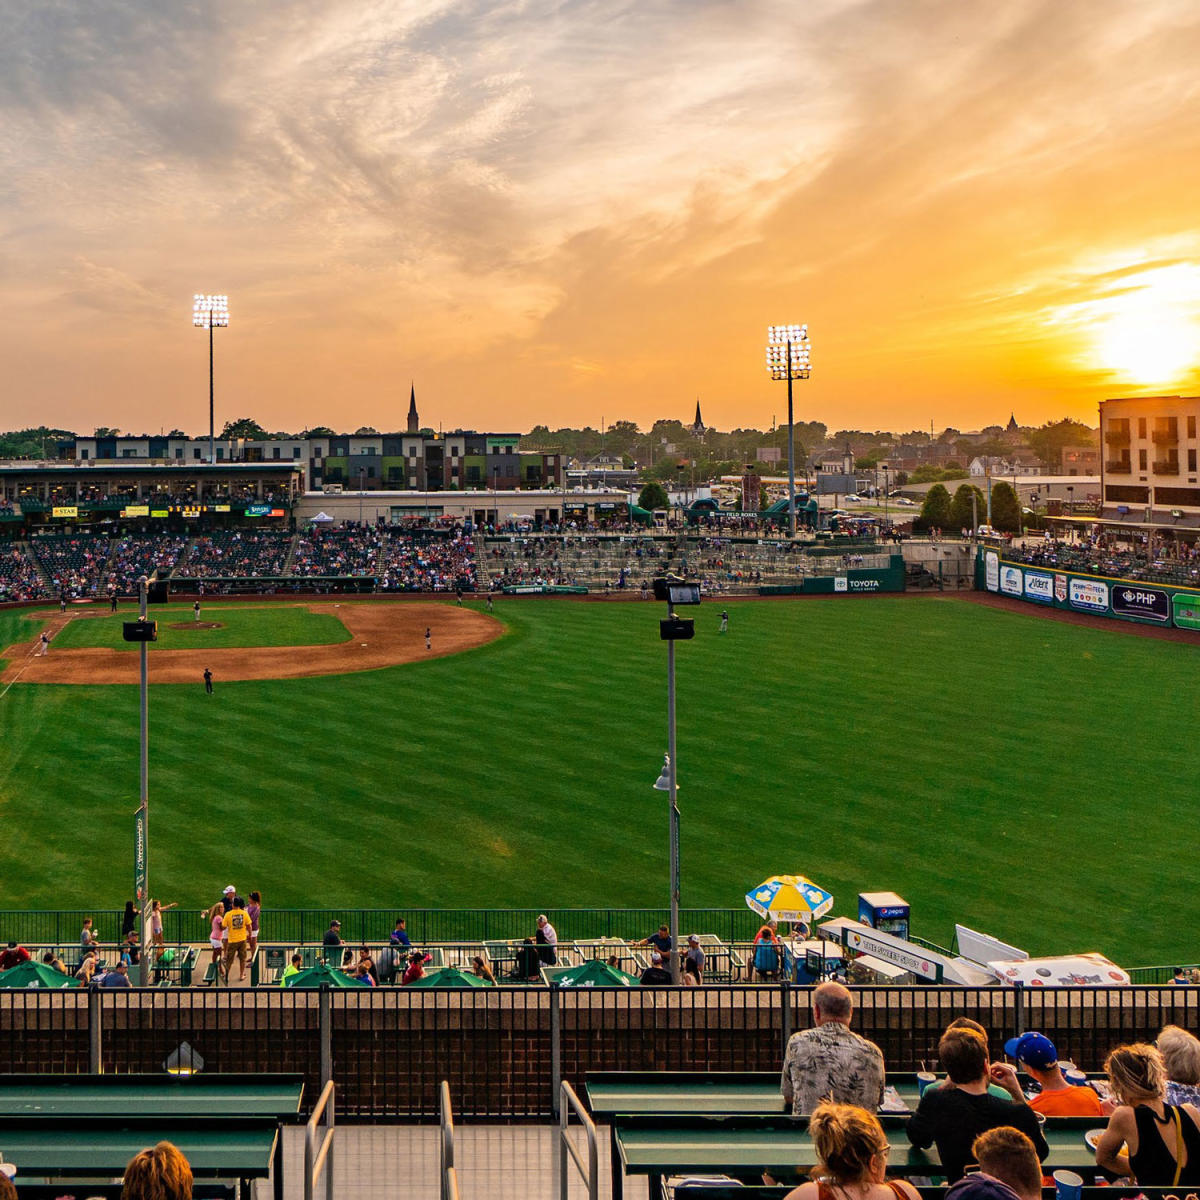 Sunset over a TinCaps baseball game at Parkview Field in Downtown Fort Wayne, Indiana